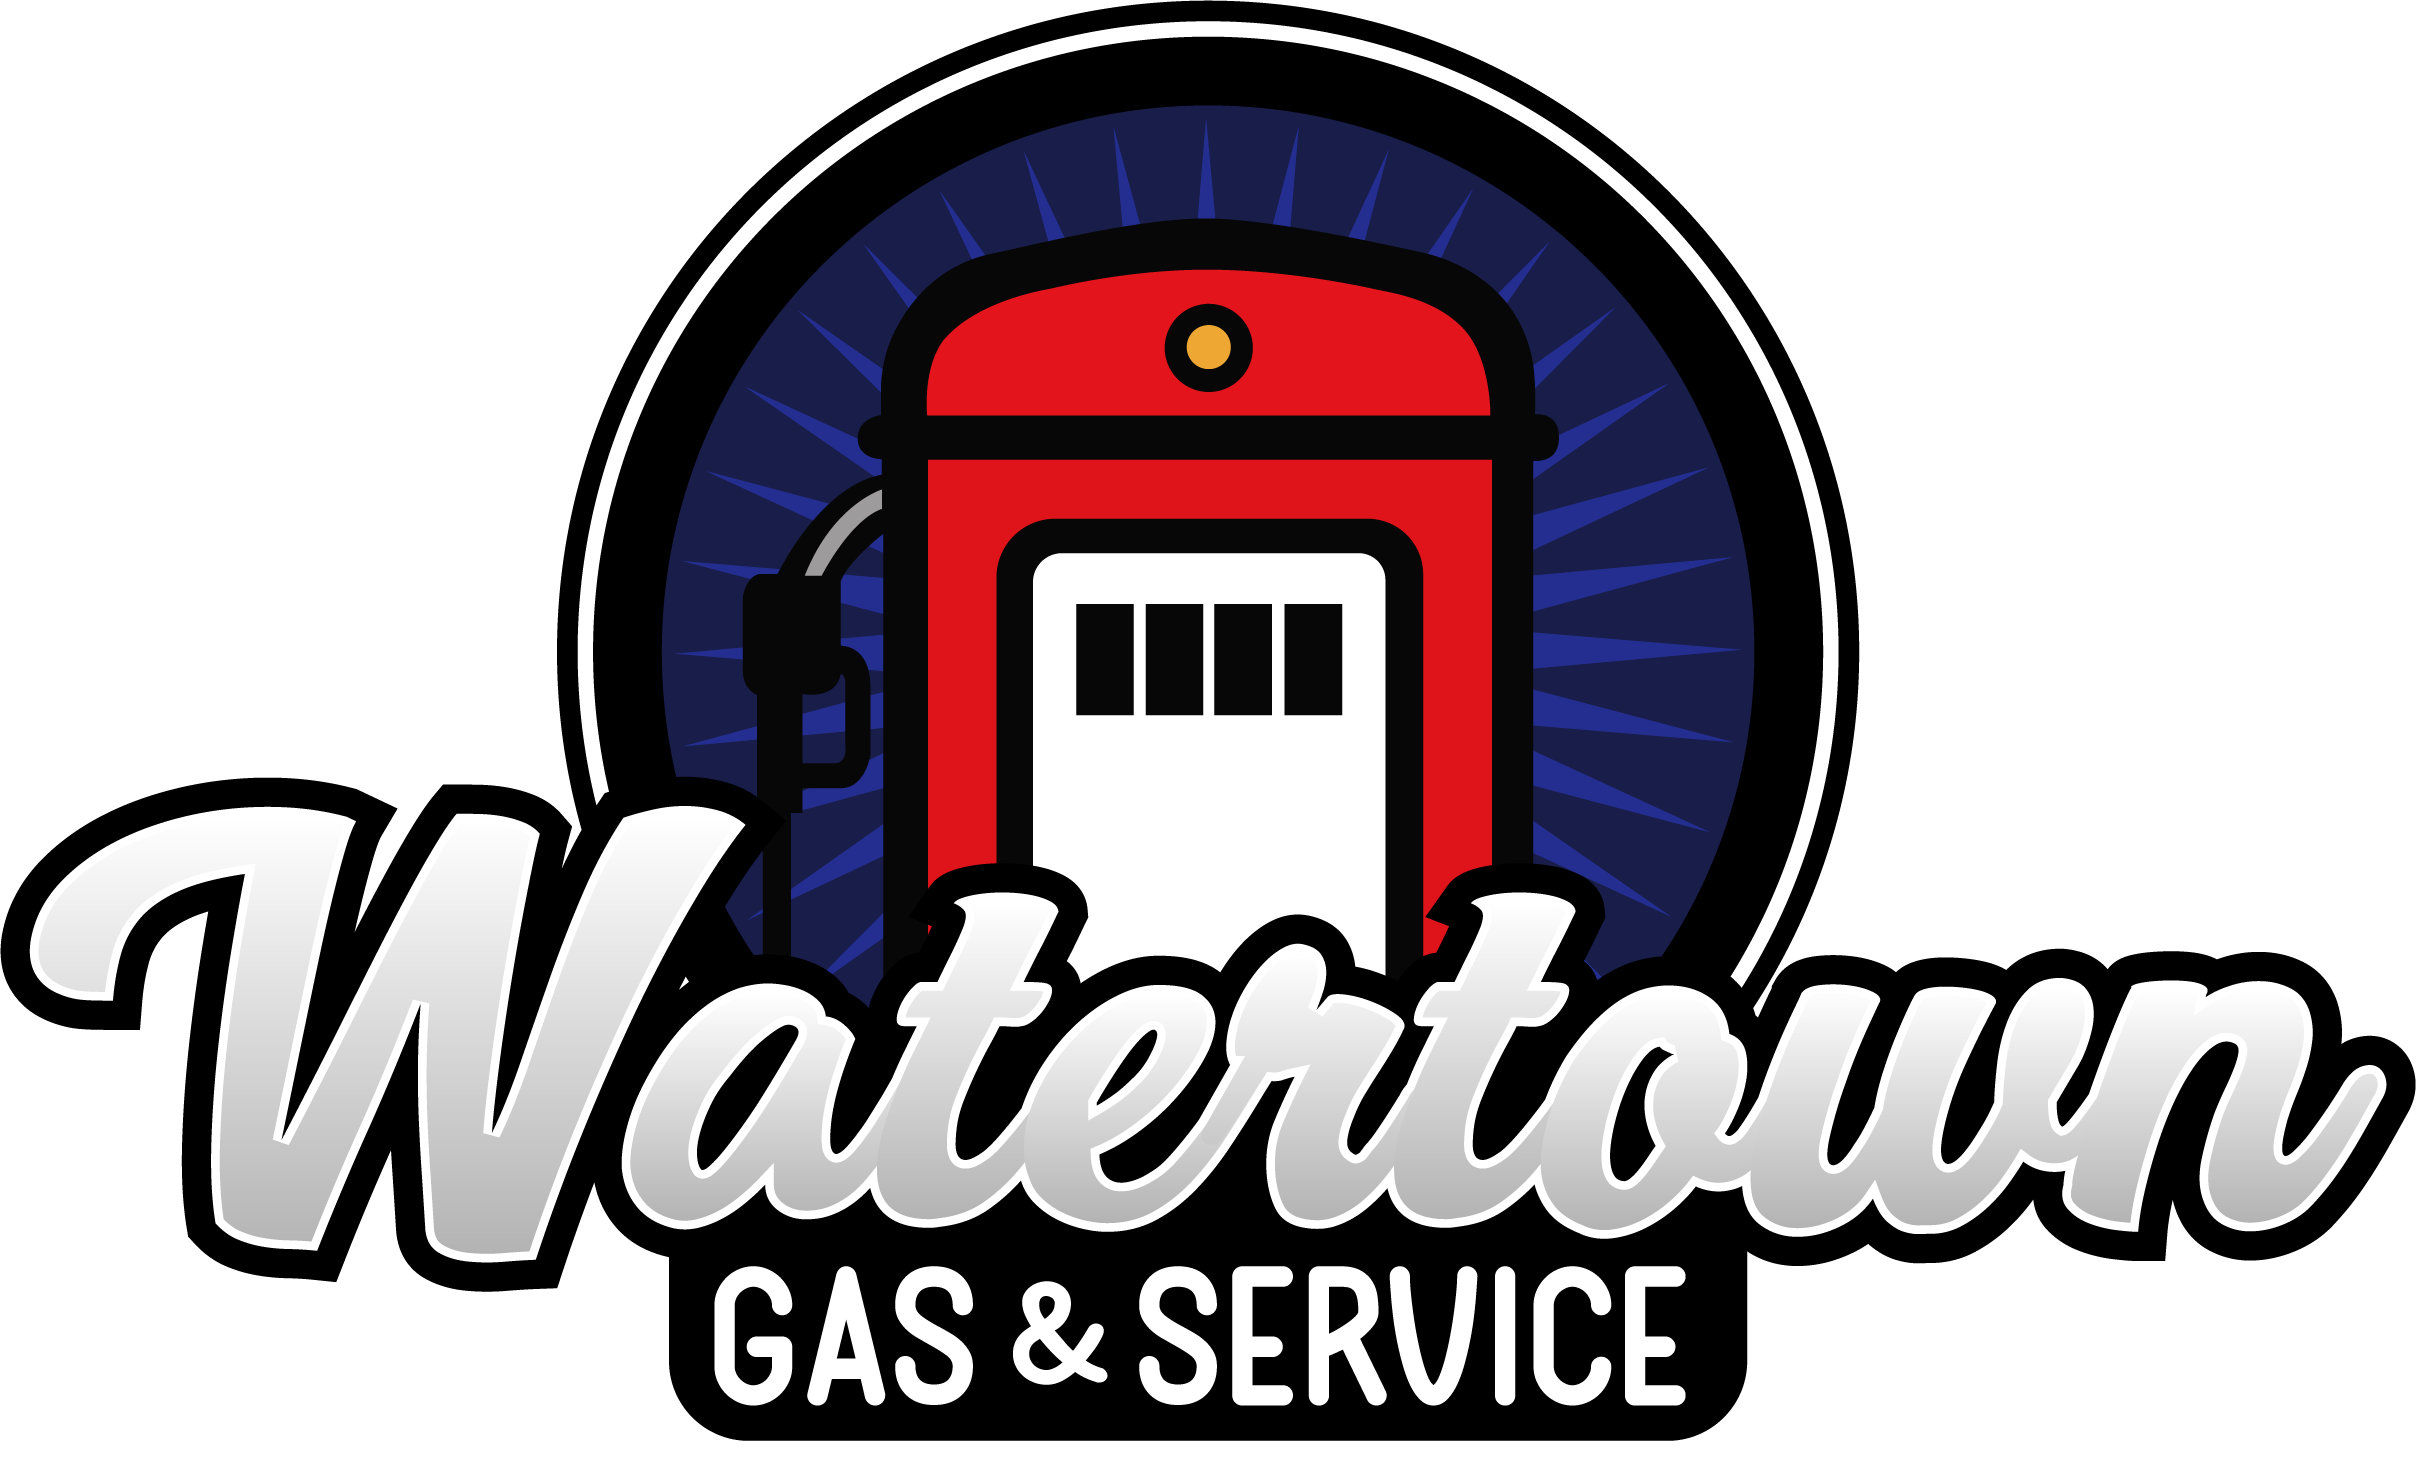 Watertown Gas and Service Logo